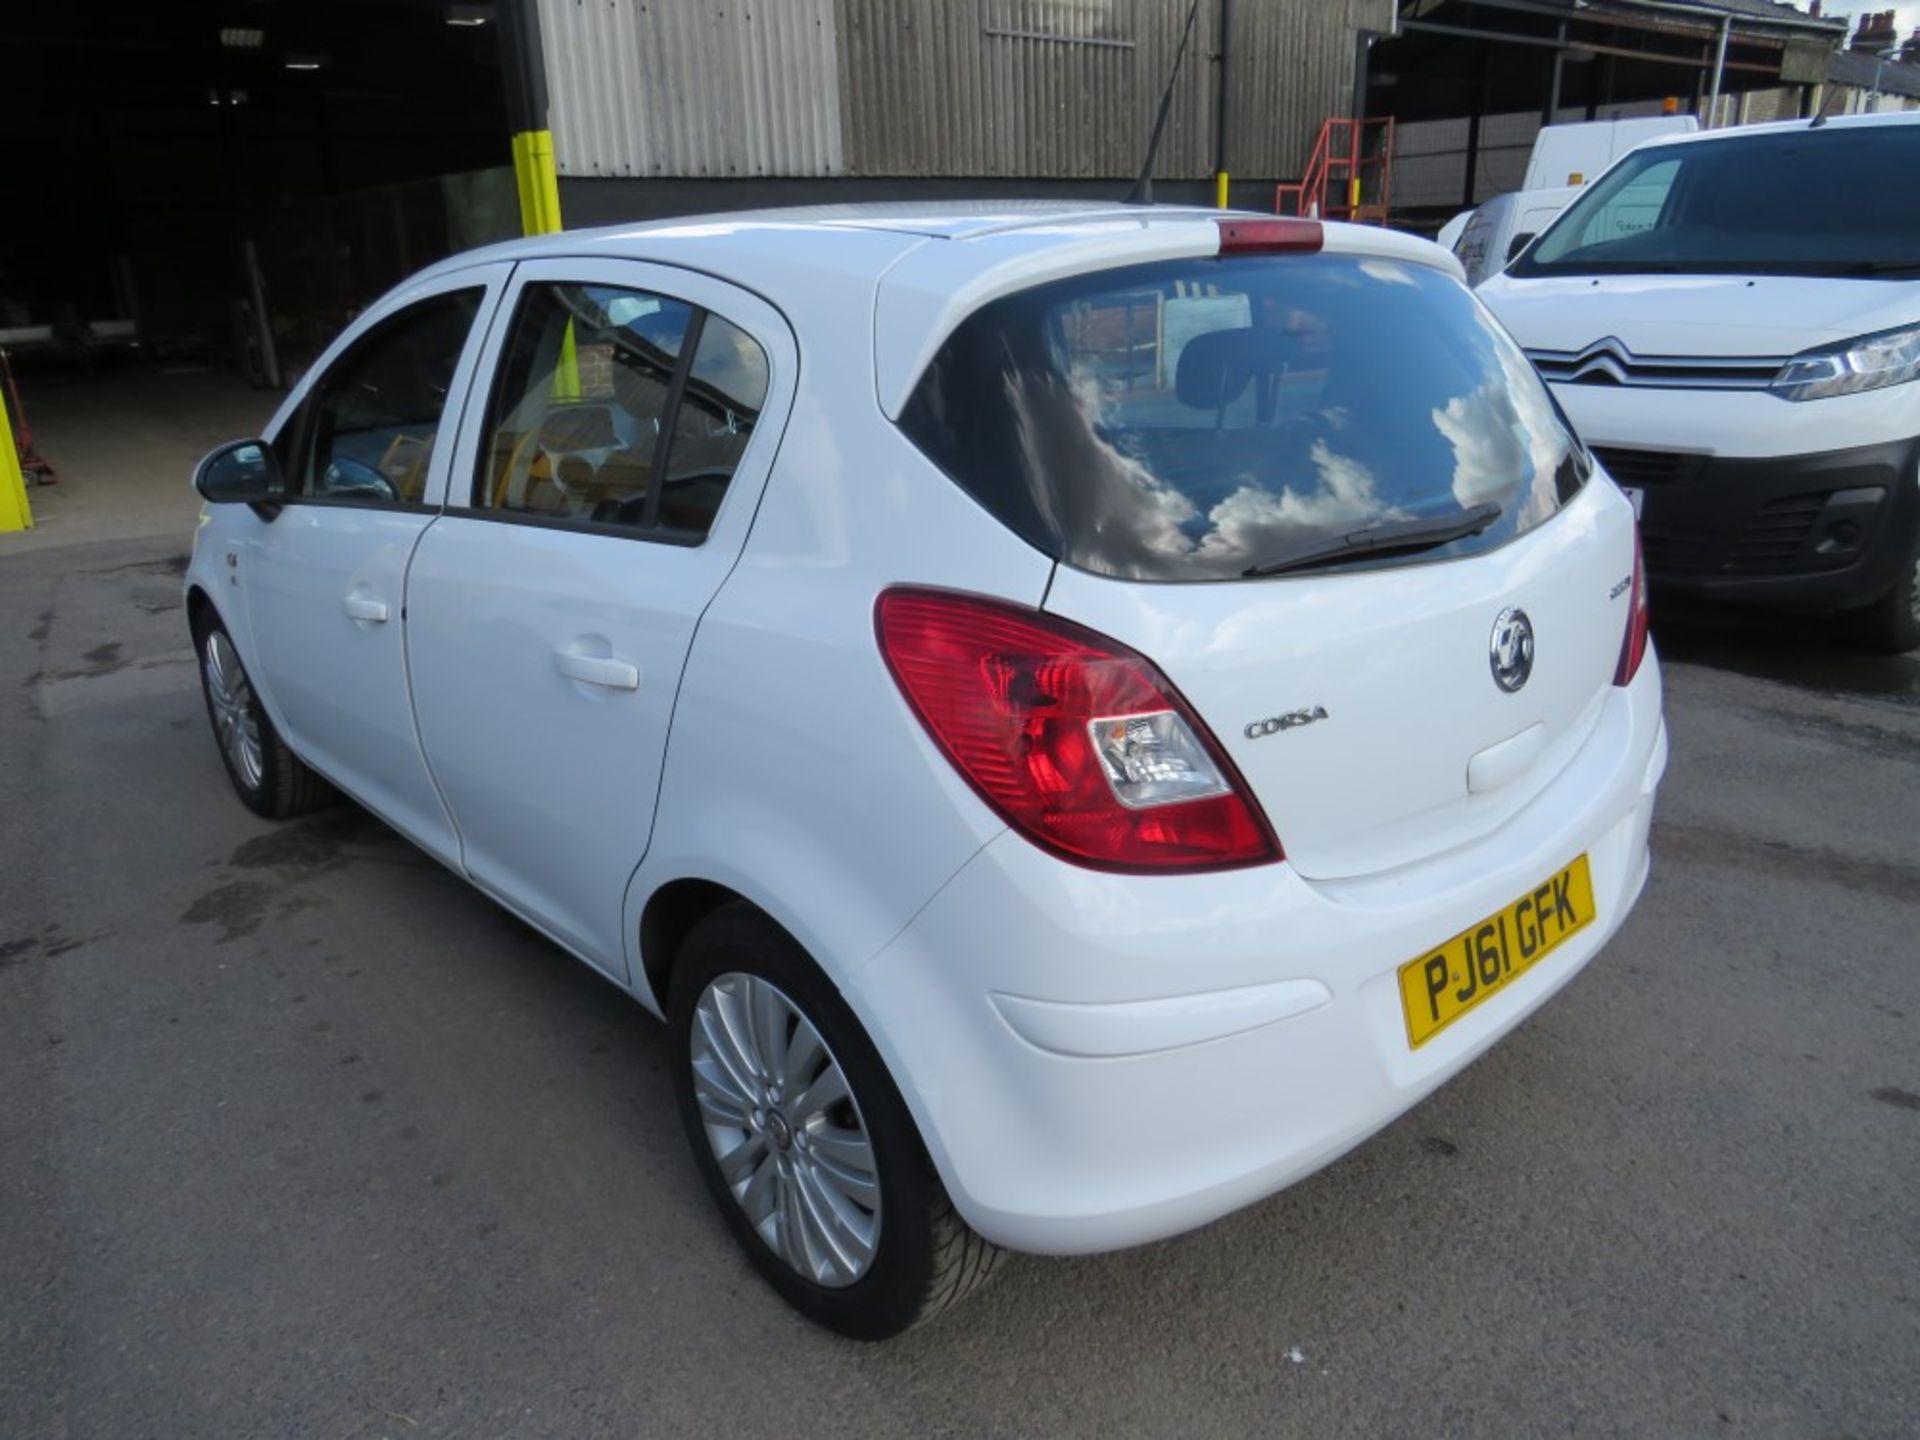 61 reg VAUXHALL CORSA EXCITE ECOLFEX 1.0 HATCHBACK (RUNS & DRIVES BUT ENGINE & HEAD GASKET FAULTS) - Image 3 of 6